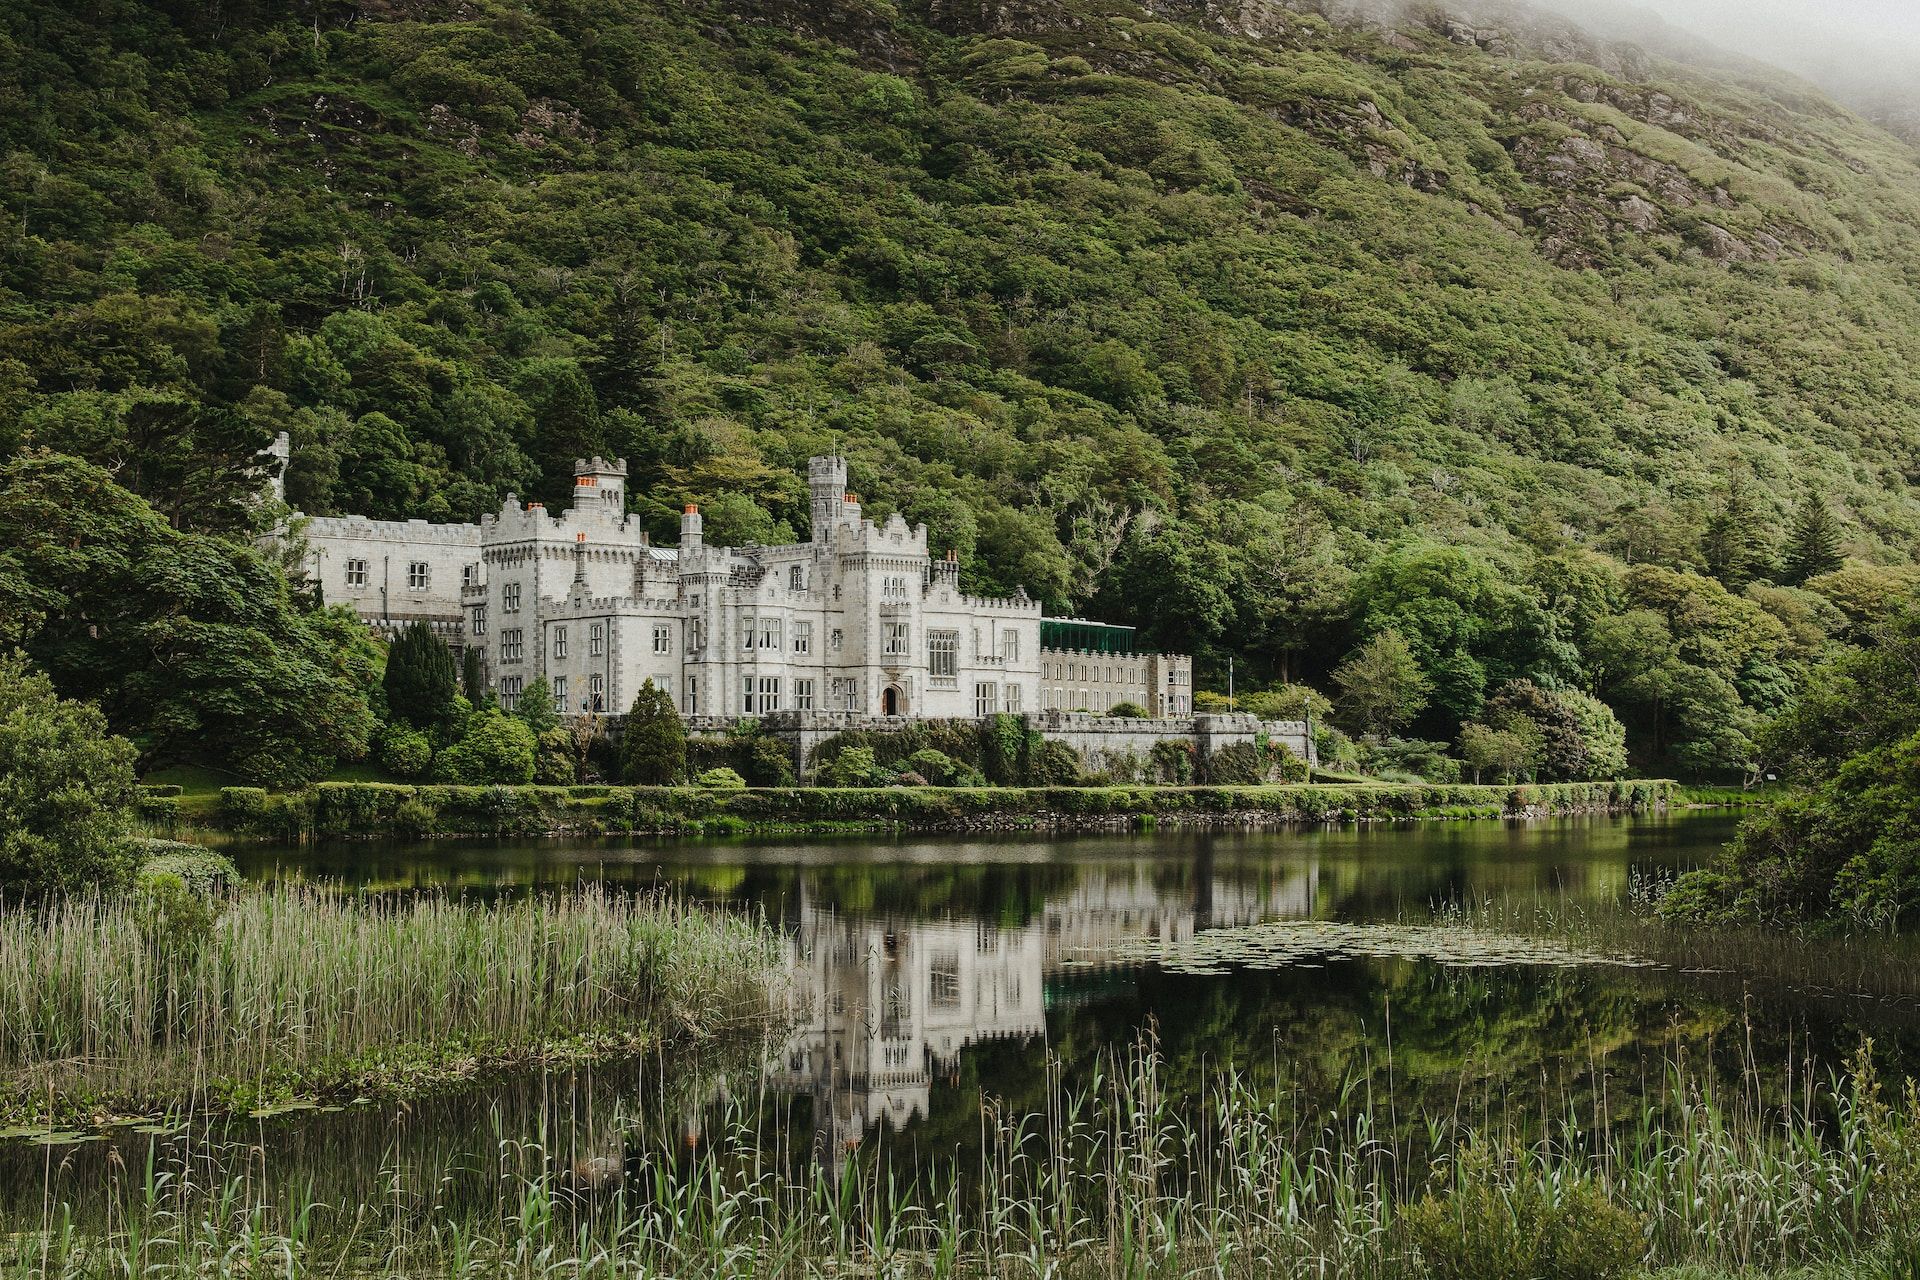 Kylemore Abbey, Kylemore Abbey, Pollacappul, County Galway, Ireland